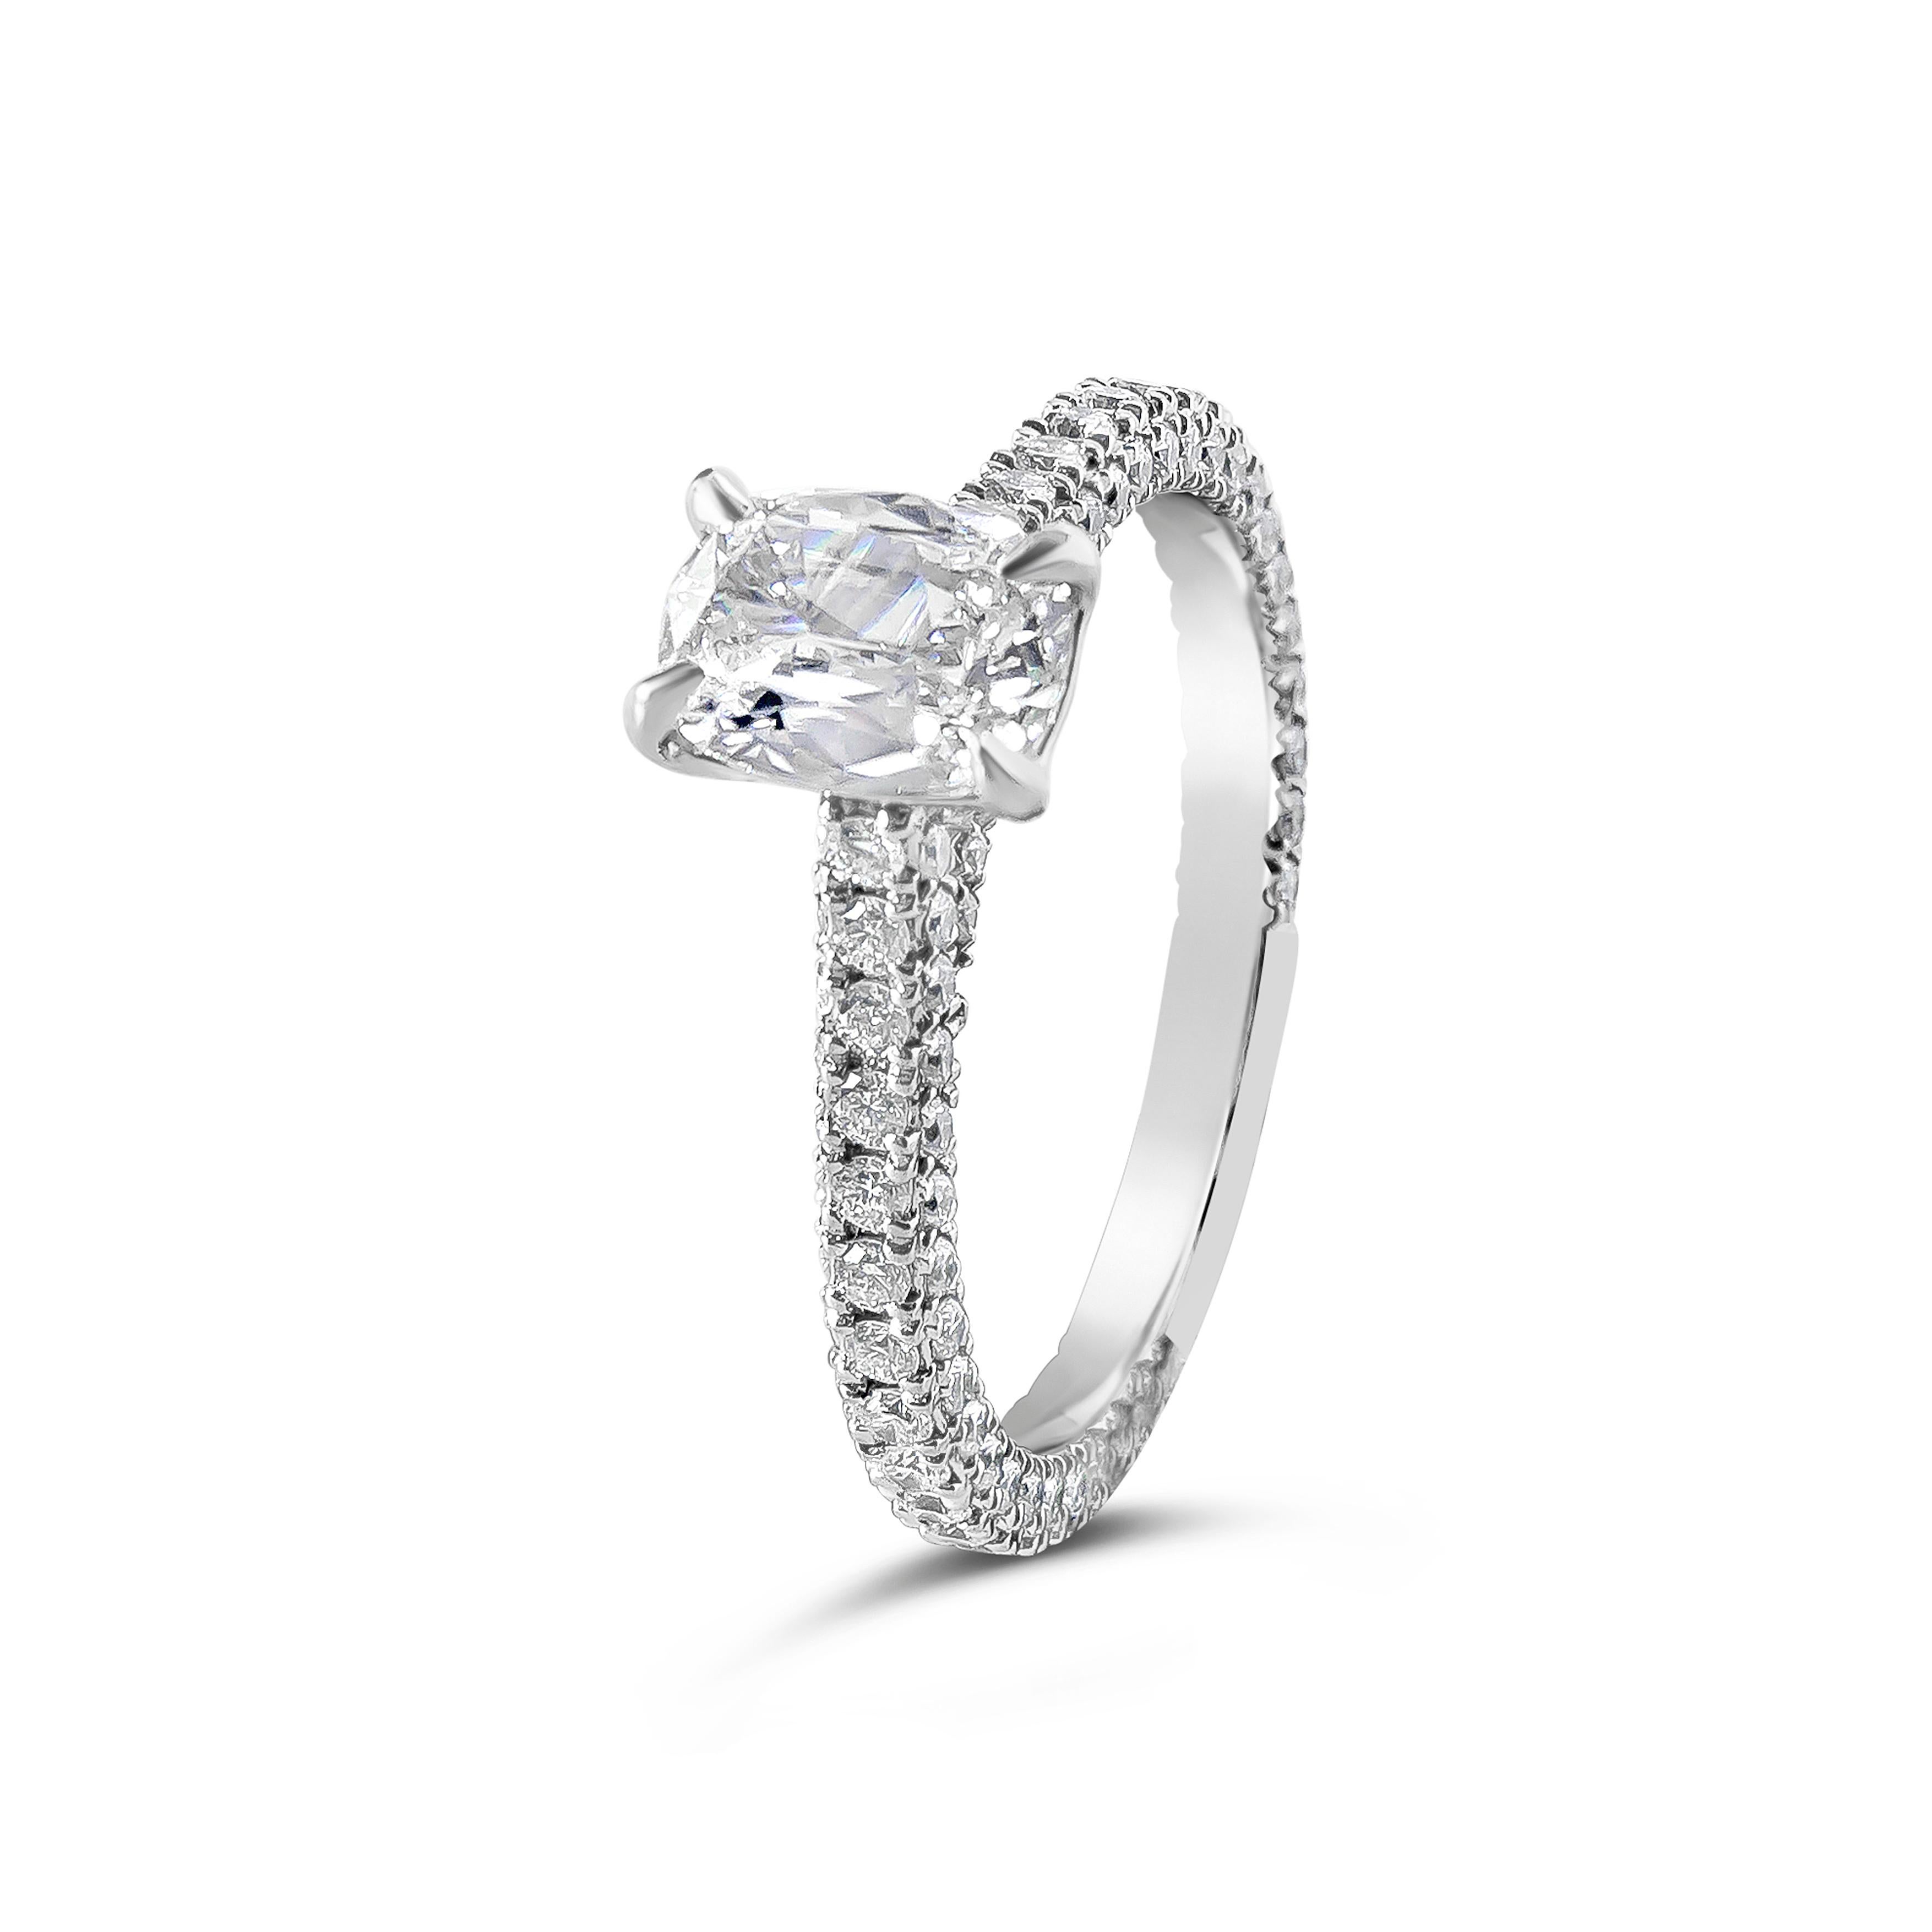 An elegant ring of elongated cushion cut diamond weighing 0.85 carats, securely set in four prong basket setting. Certified by GIA as I color and VS2 clarity. Set in an intricately designed platinum shank micro-pave accented with round brilliant cut